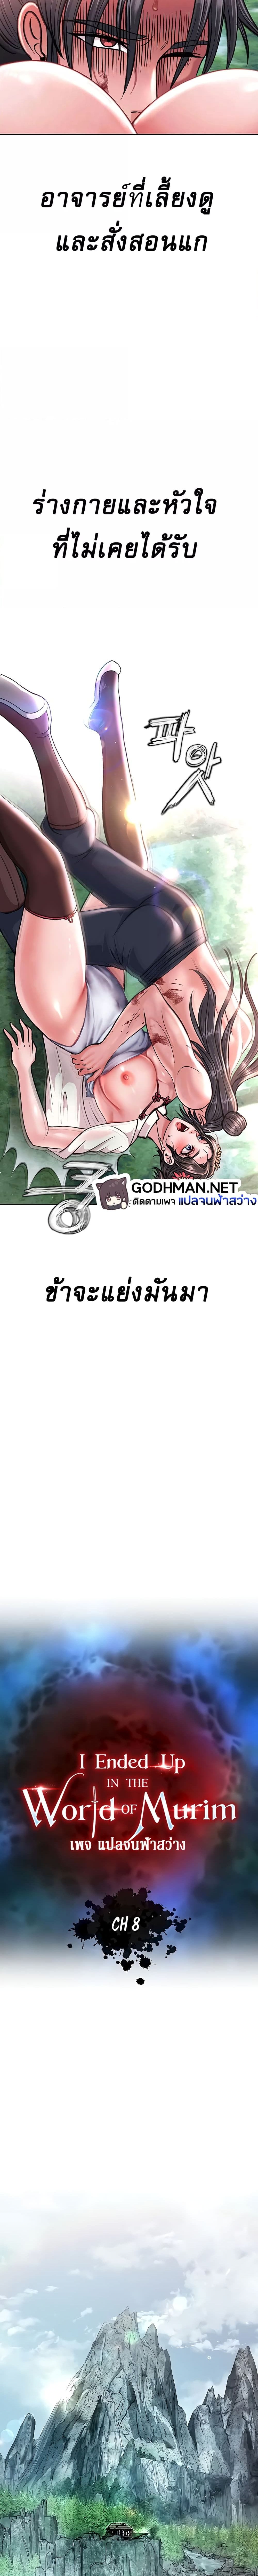 I Ended Up in the World of Murim ตอนที่ 8 ภาพ 1